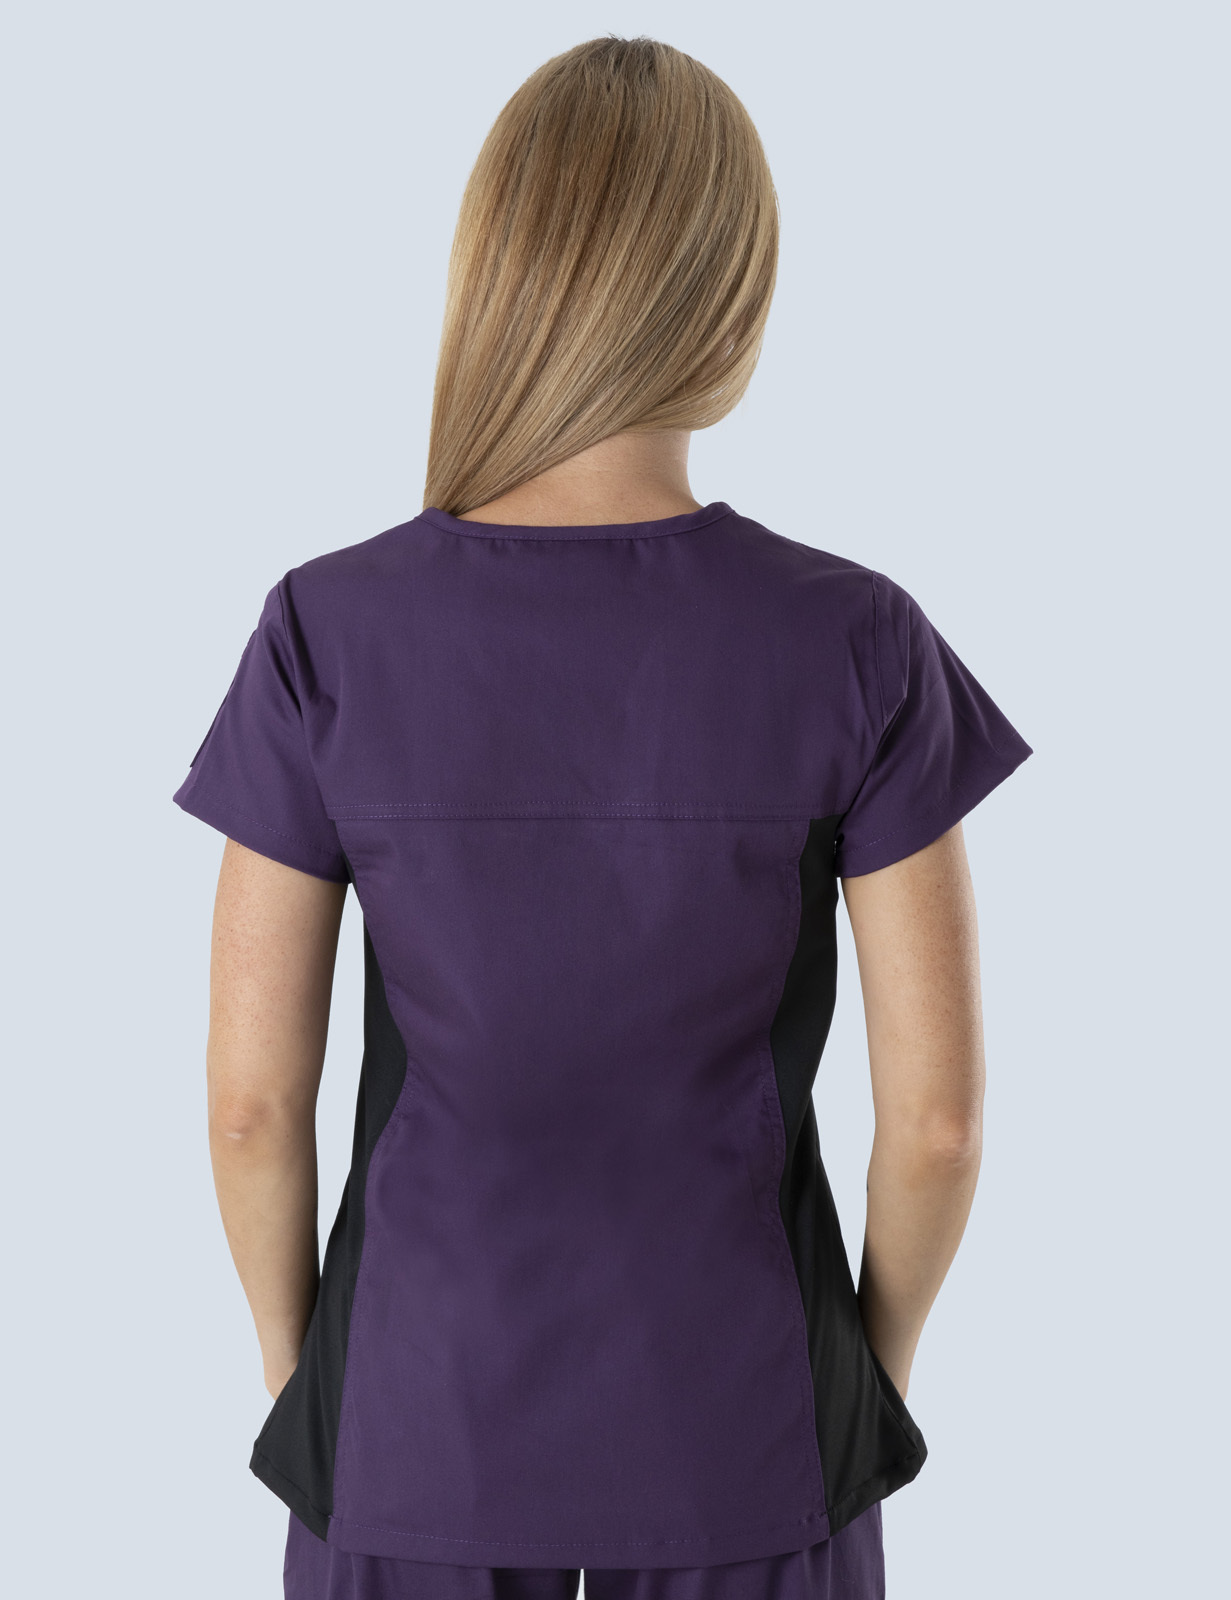 Women's Fit Solid Scrub Top With Spandex Panel - Aubergine - Small - 0